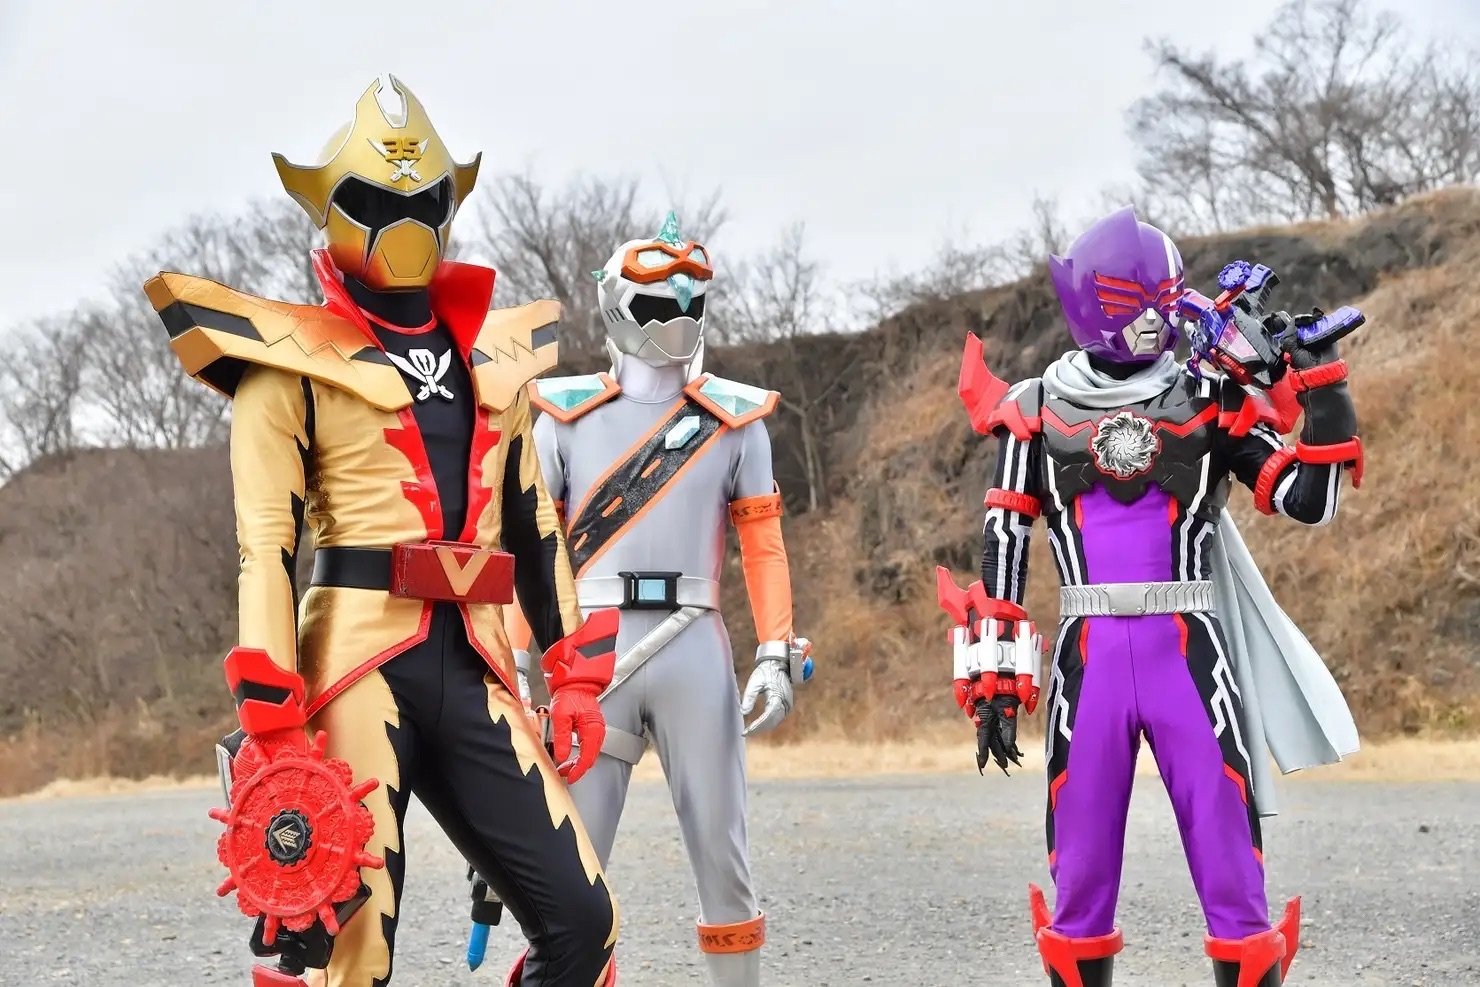 Imaginary Fighter (COMMISIONS ARE OPEN BABY!): We got a couple of Sixth Rangers here My Friend: But Stacey isn't a Sixt- Me: WE GOT A COUPLE OF SIXTH RANGERS